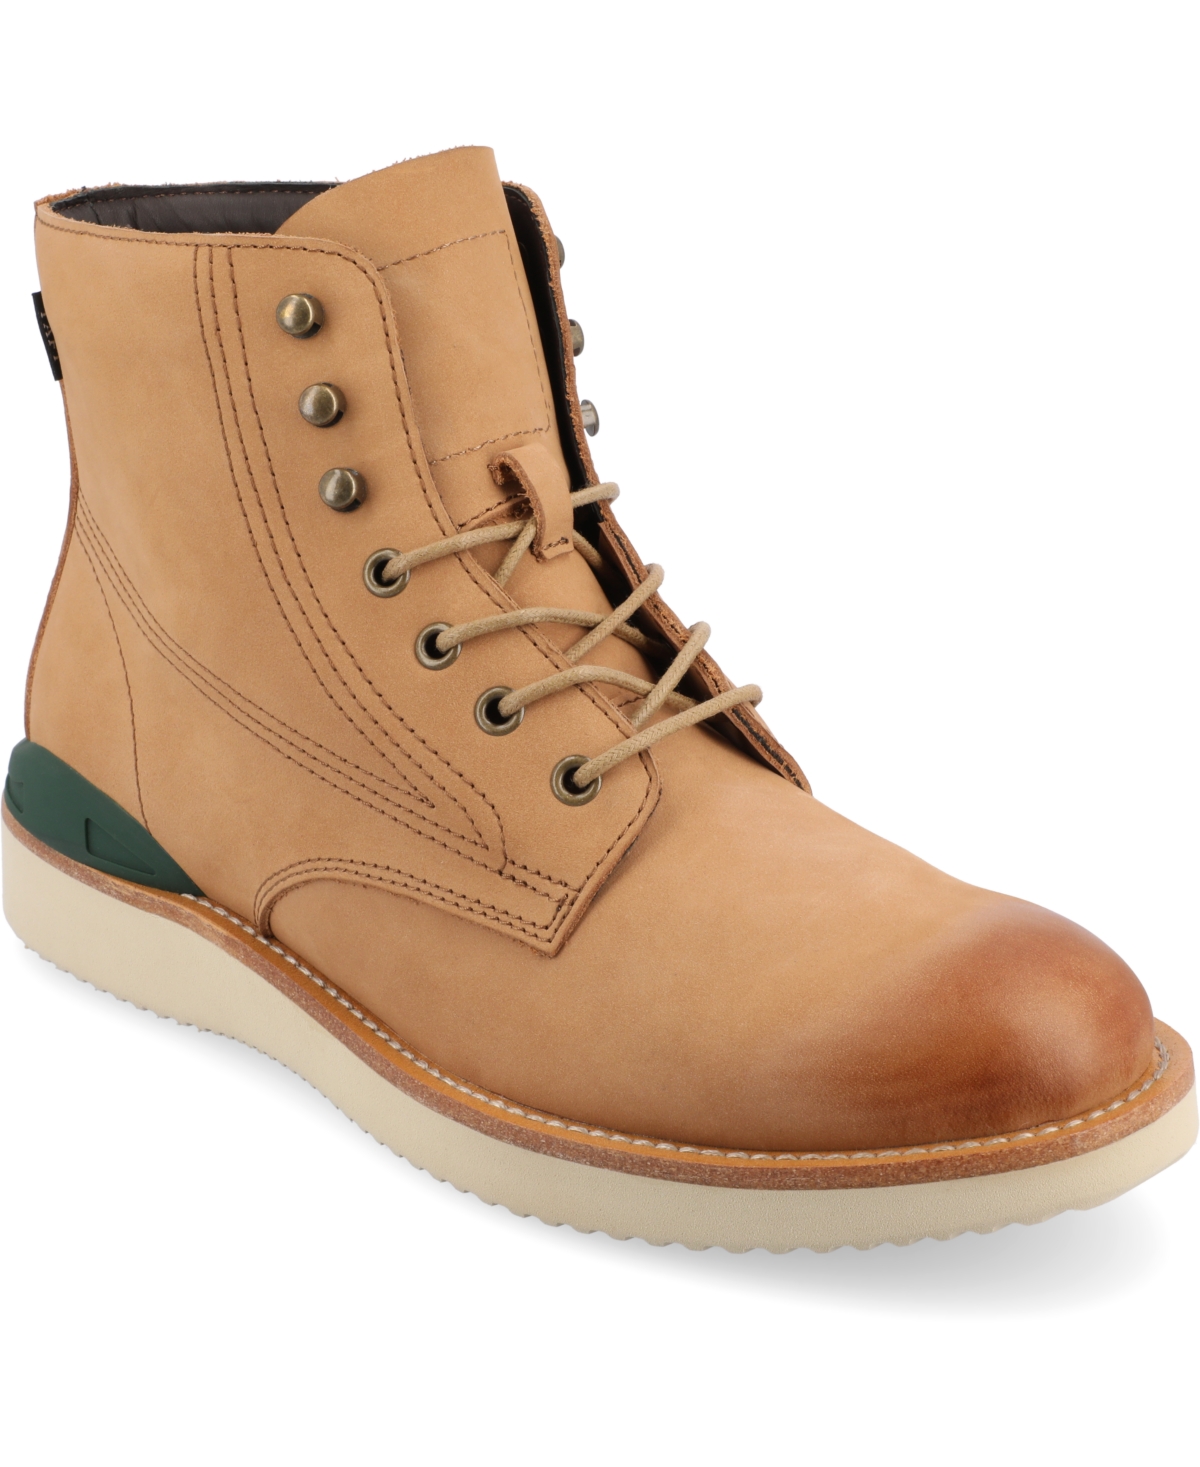 365 Men's Model 004 Wedge Sole Lace-Up Ankle Boots - Chili